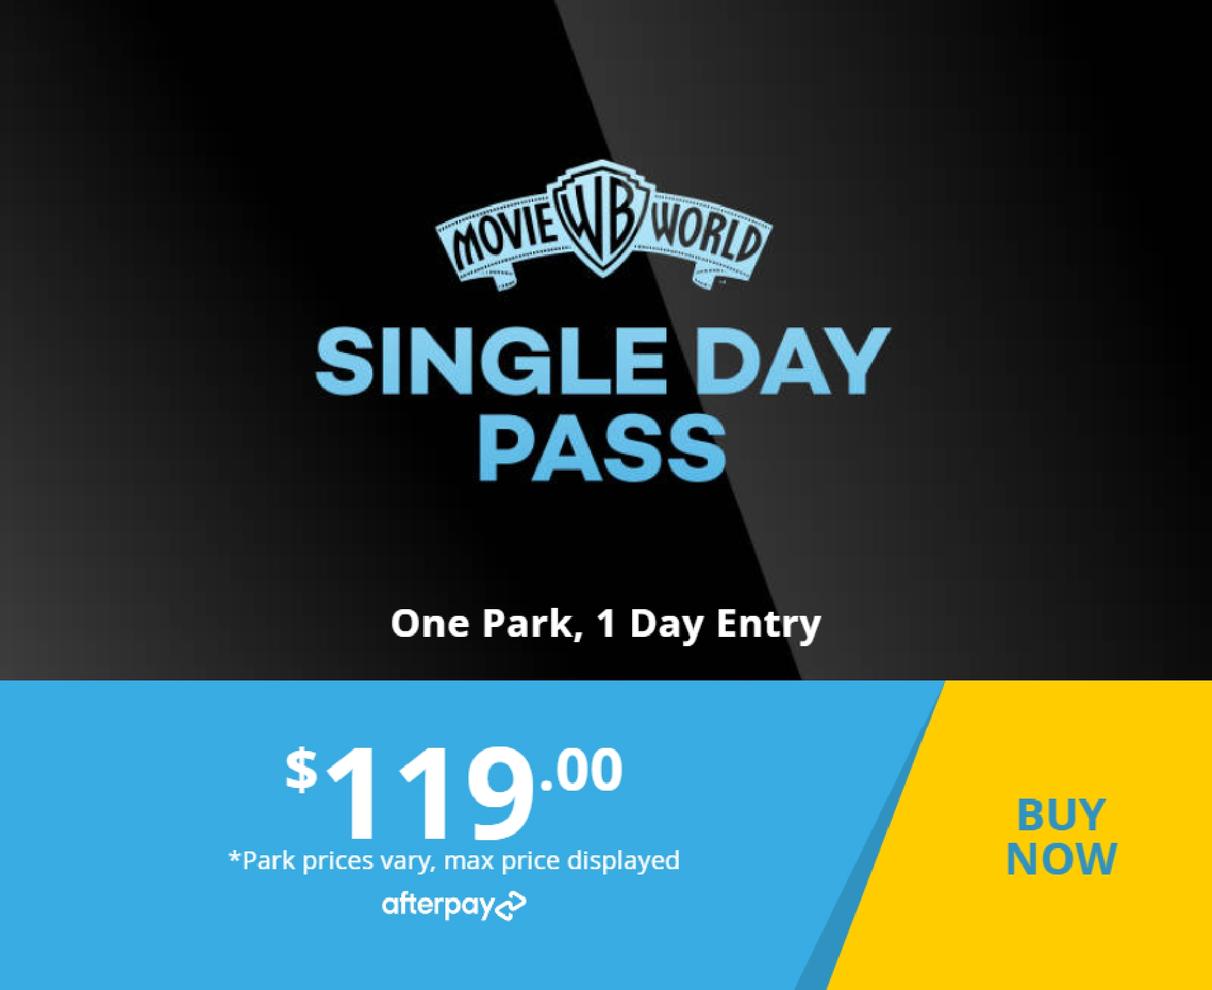 Single Day Pass offers in Movie World